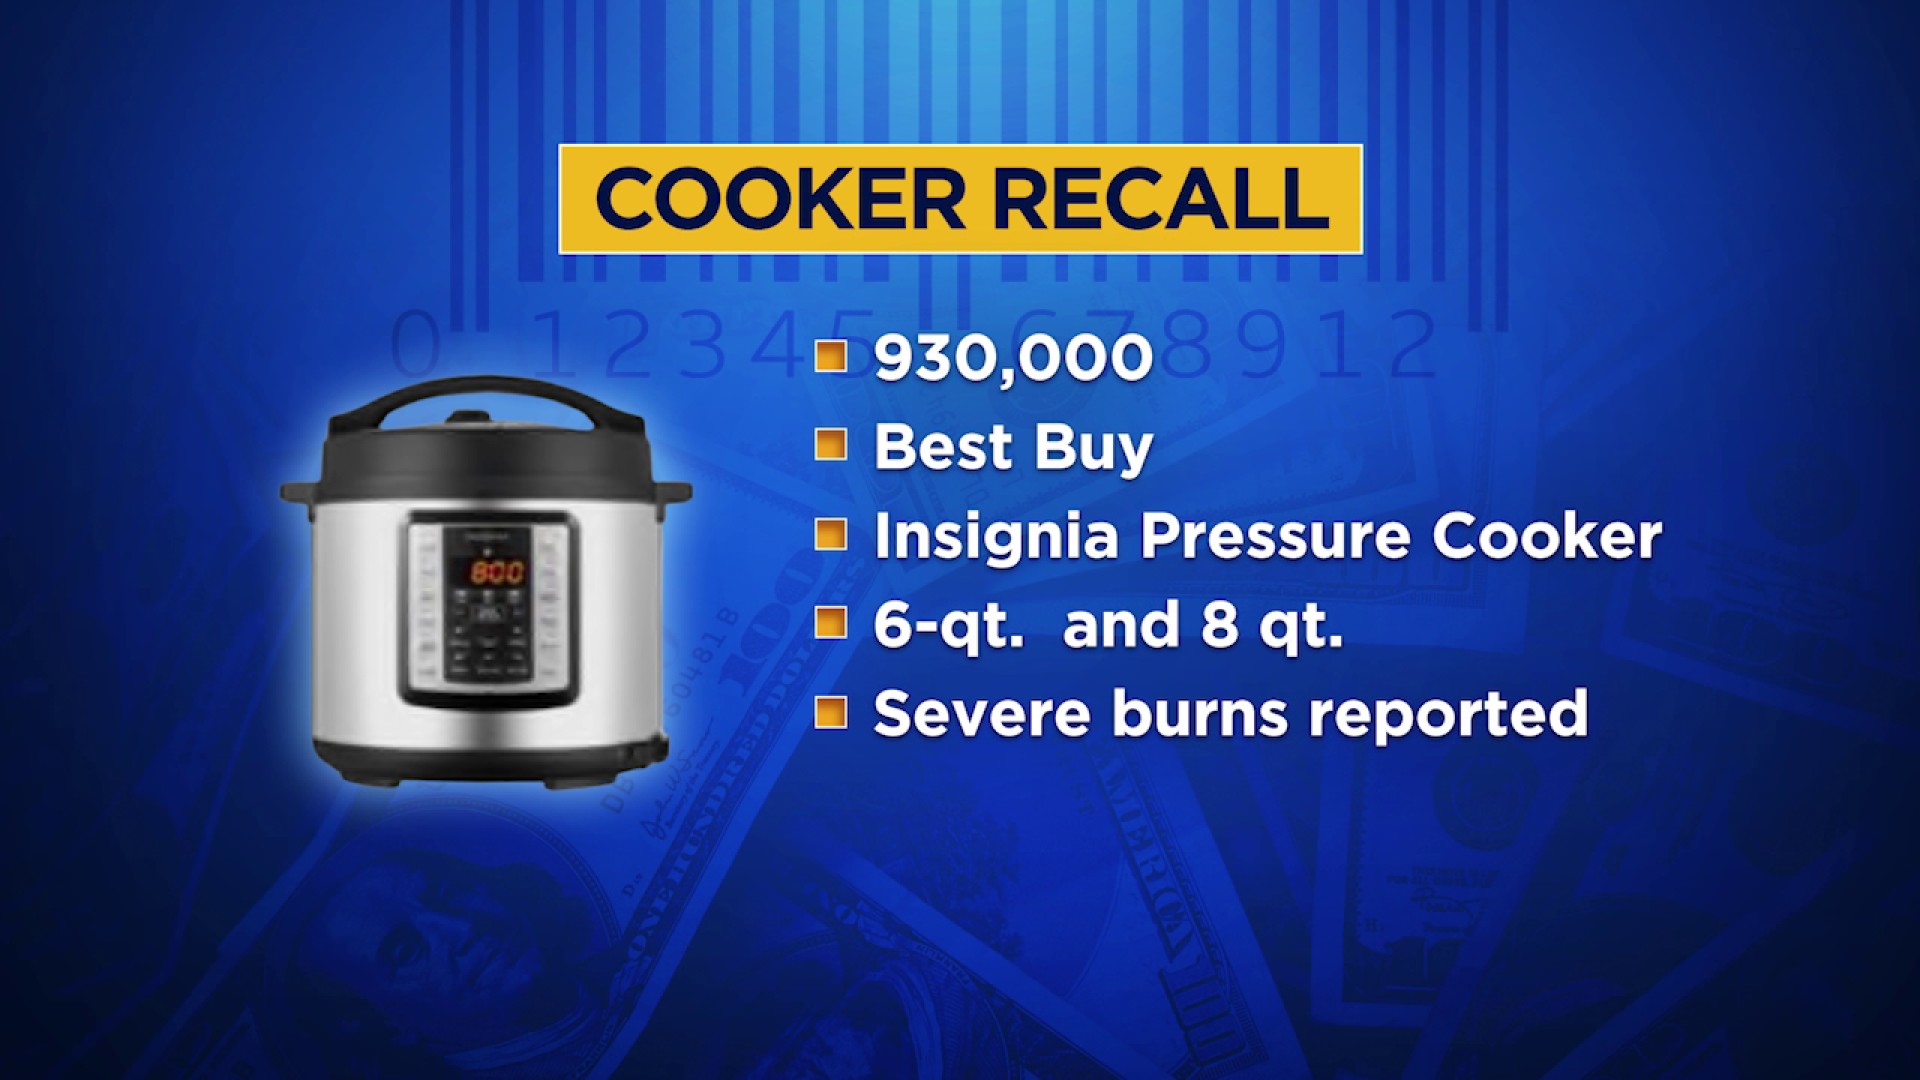 Best Buy recalls nearly 1 million pressure cookers after reports